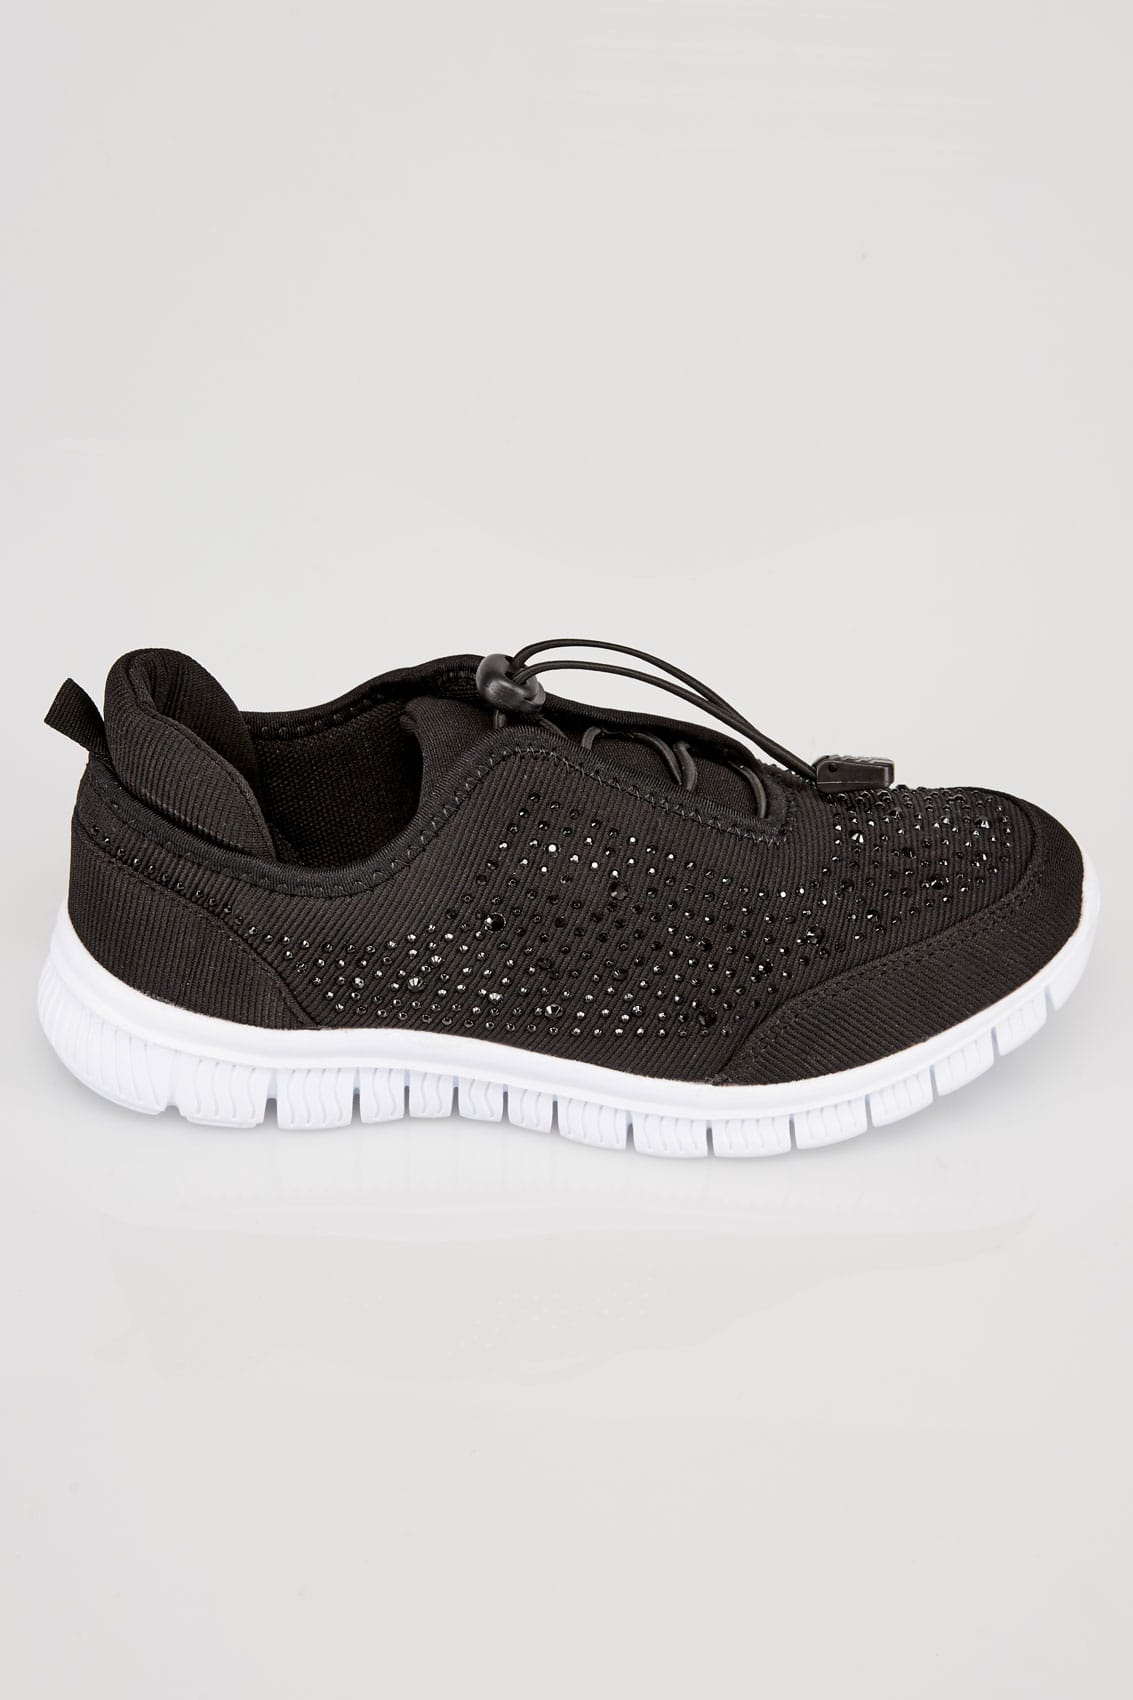 Black Embellished Trainers In EEE Fit1133 x 1700